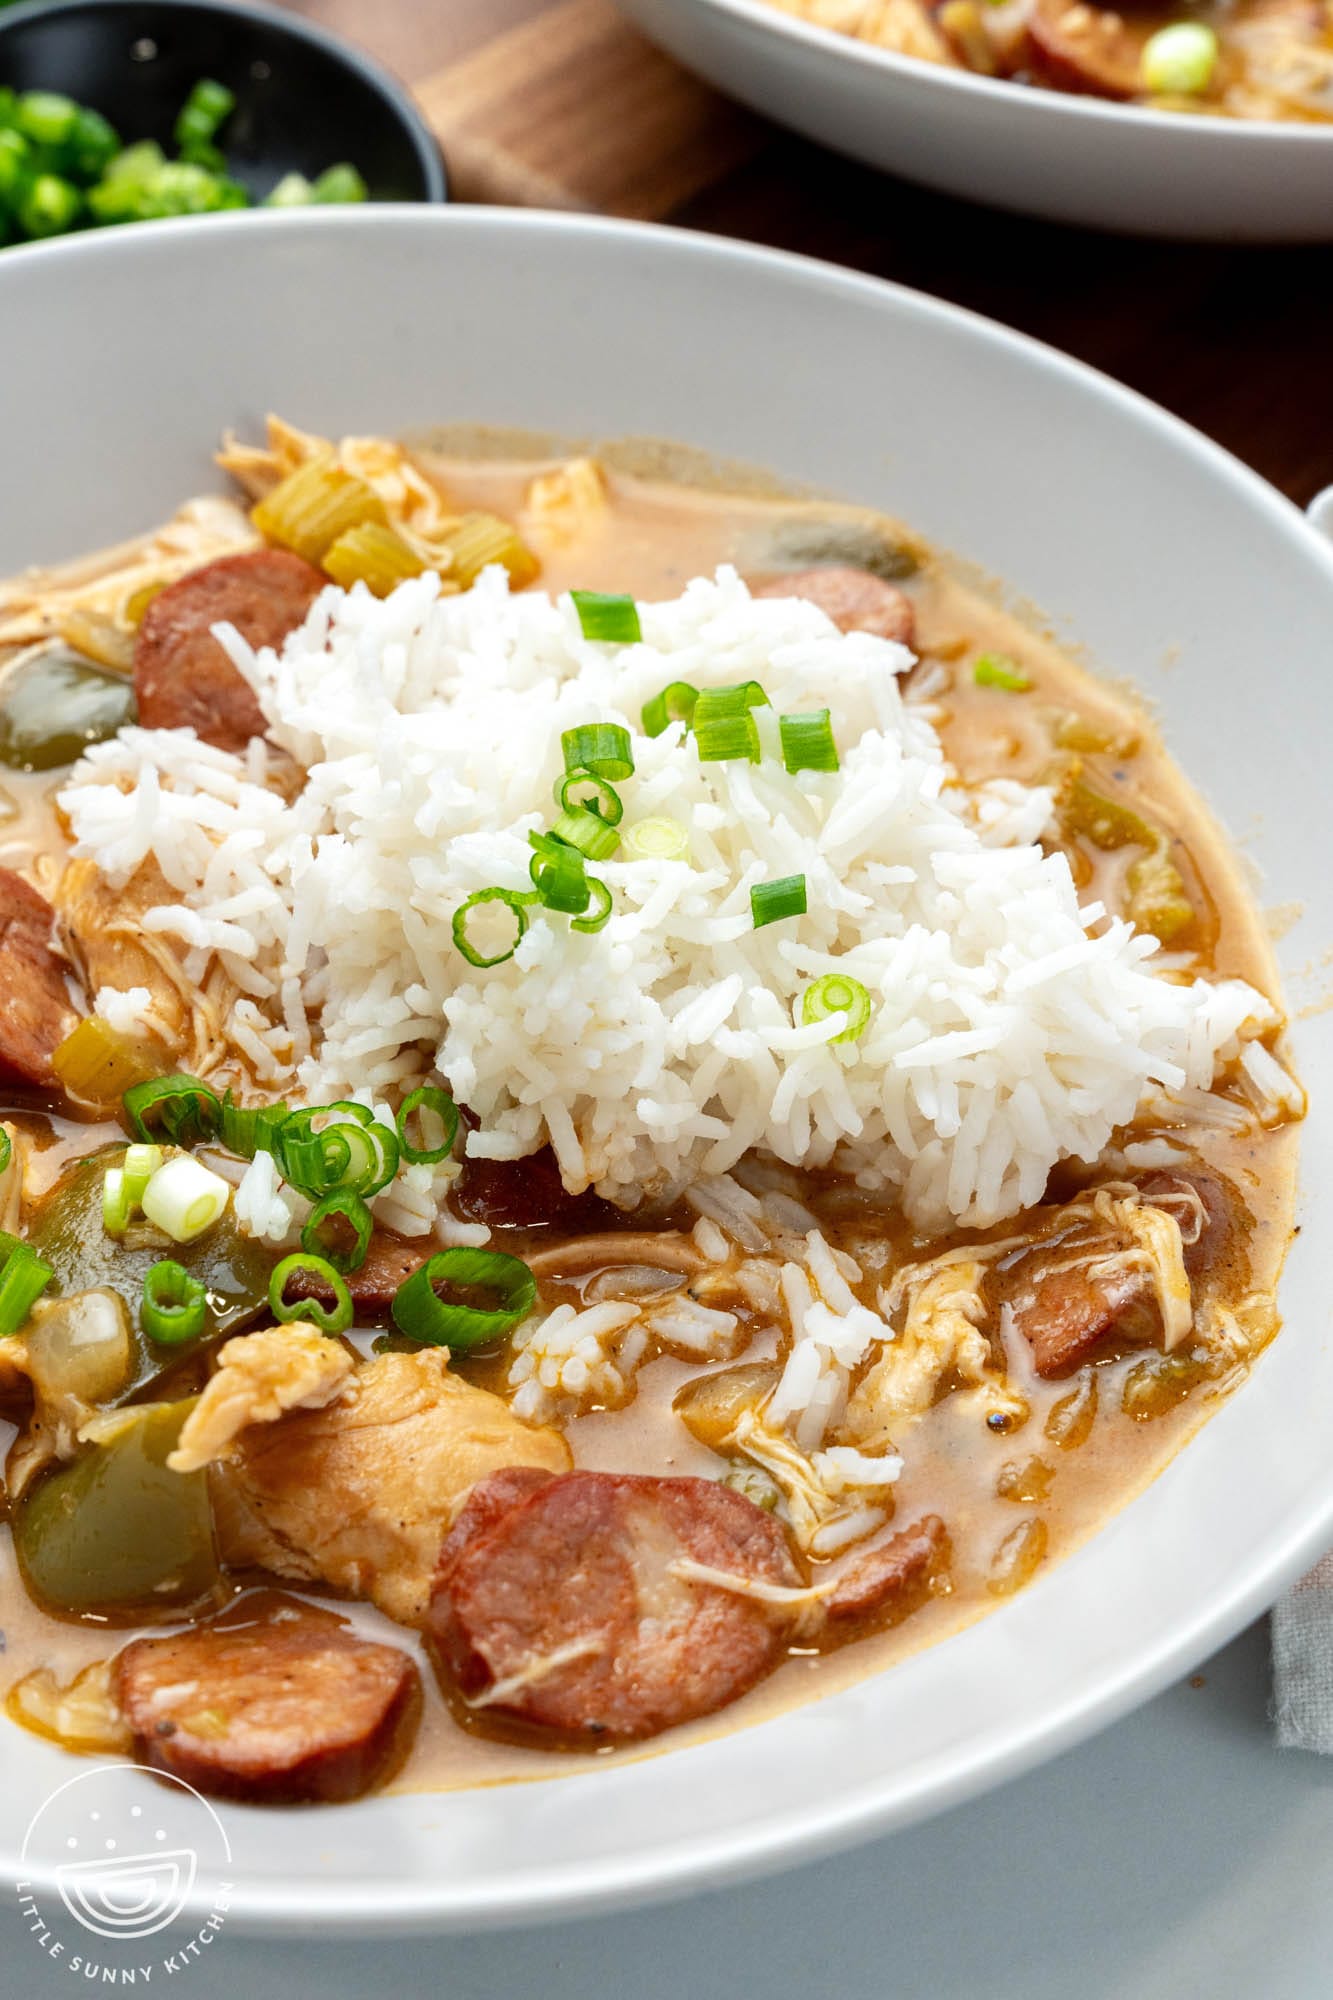 a white bowl plate of saucy chicken and sausage gumbo topped with a scoop of white rice, garnished with sliced green onion.